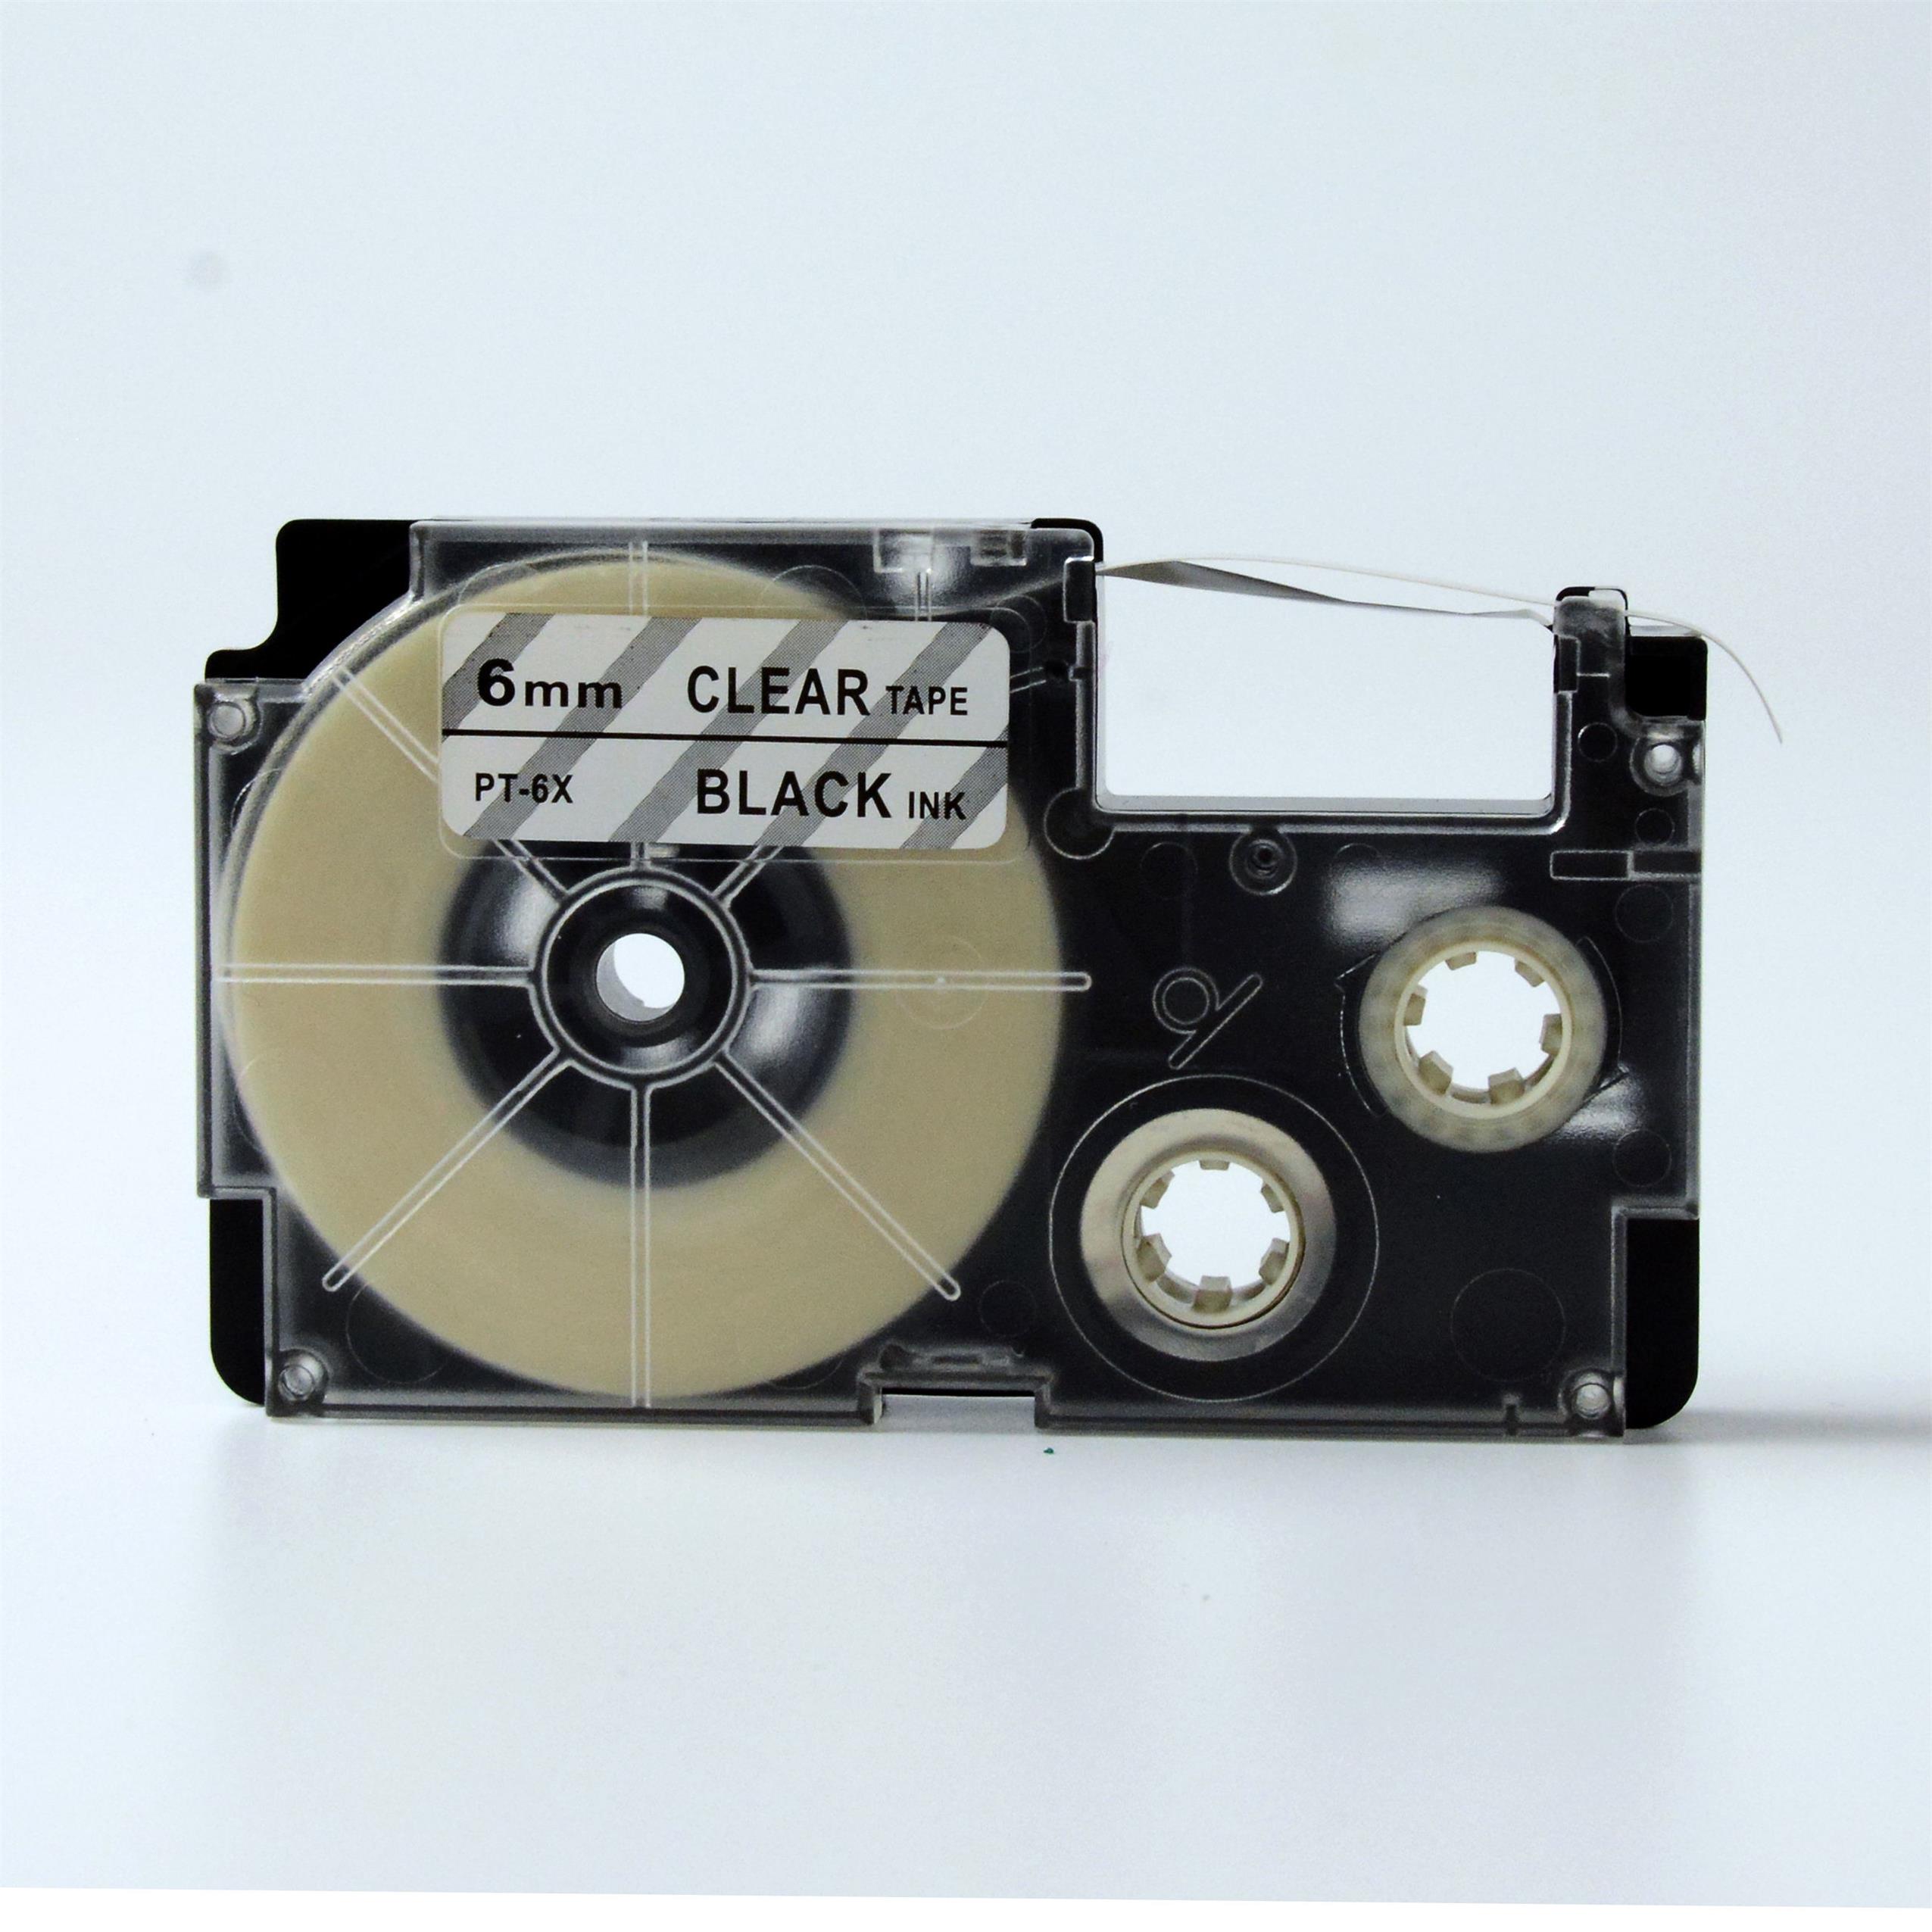 Compatible label tape for Casio XR-6X1